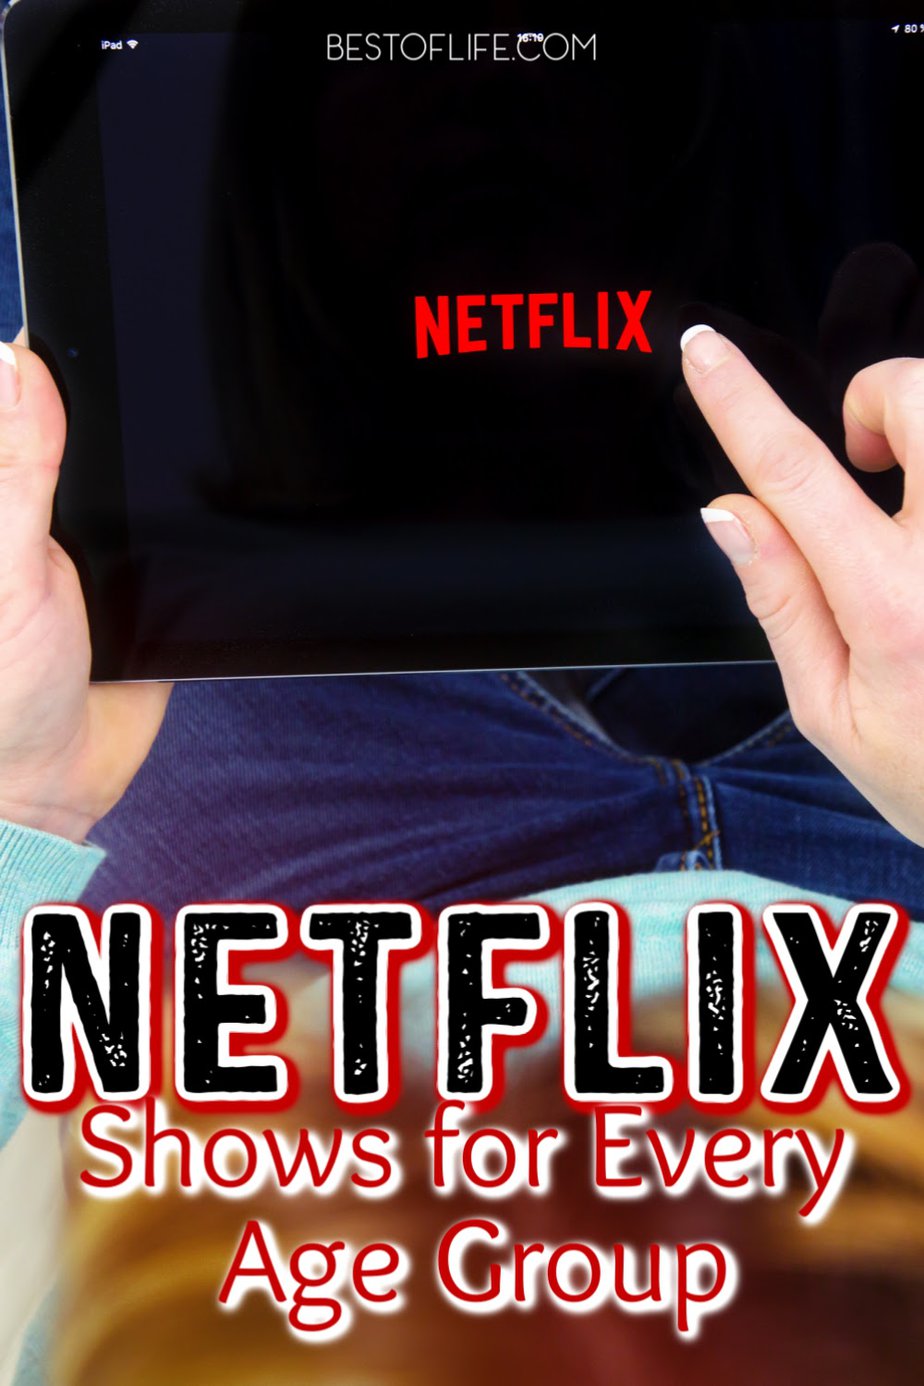 The best Netflix shows 2020 add to an already extensive list of Netflix shows to watch with friends, family, or alone on the couch. Best Netflix Shows 2019 | Best New Netflix Shows 2020 | Best Things to Watch on Netflix | What to Watch on Netflix | Best Things to Stream | Netflix Originals | New Netflix Shows #netflix